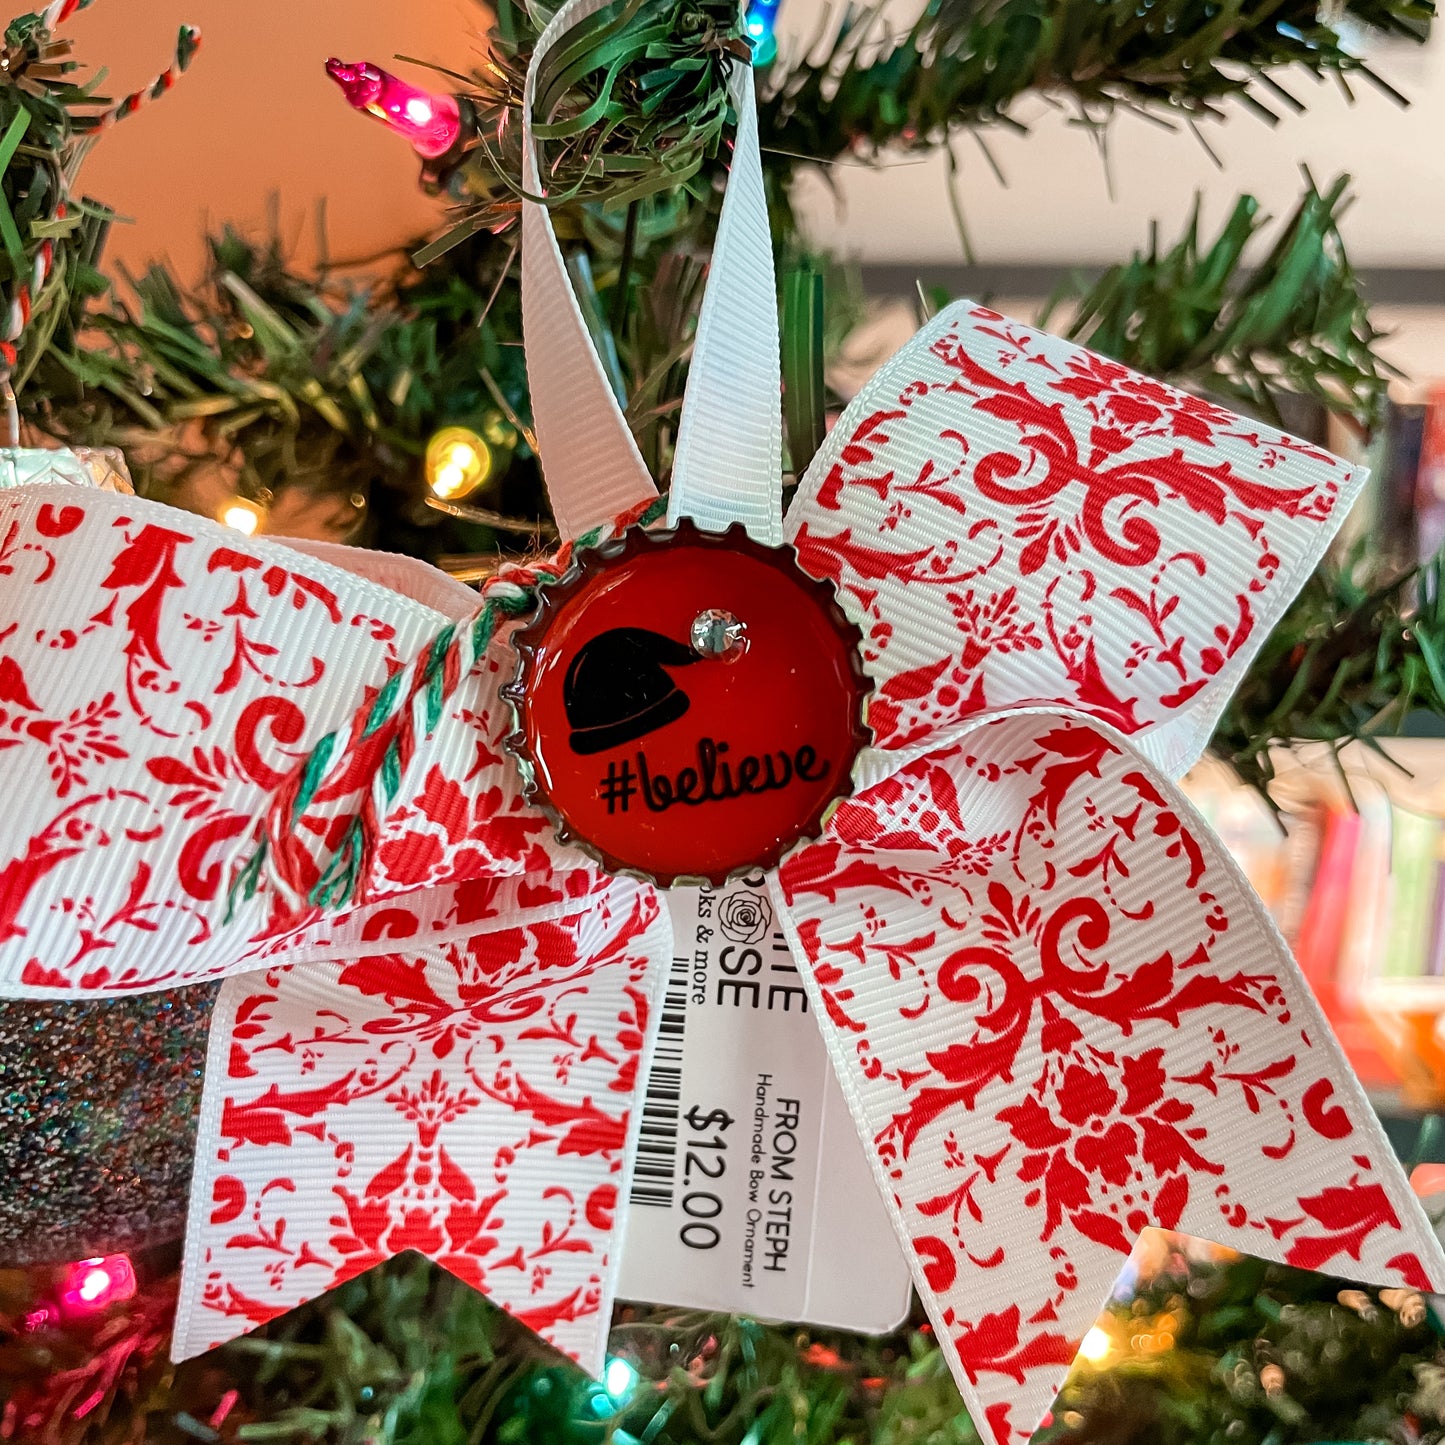 From Steph: #Believe Red Ribbon Ornament